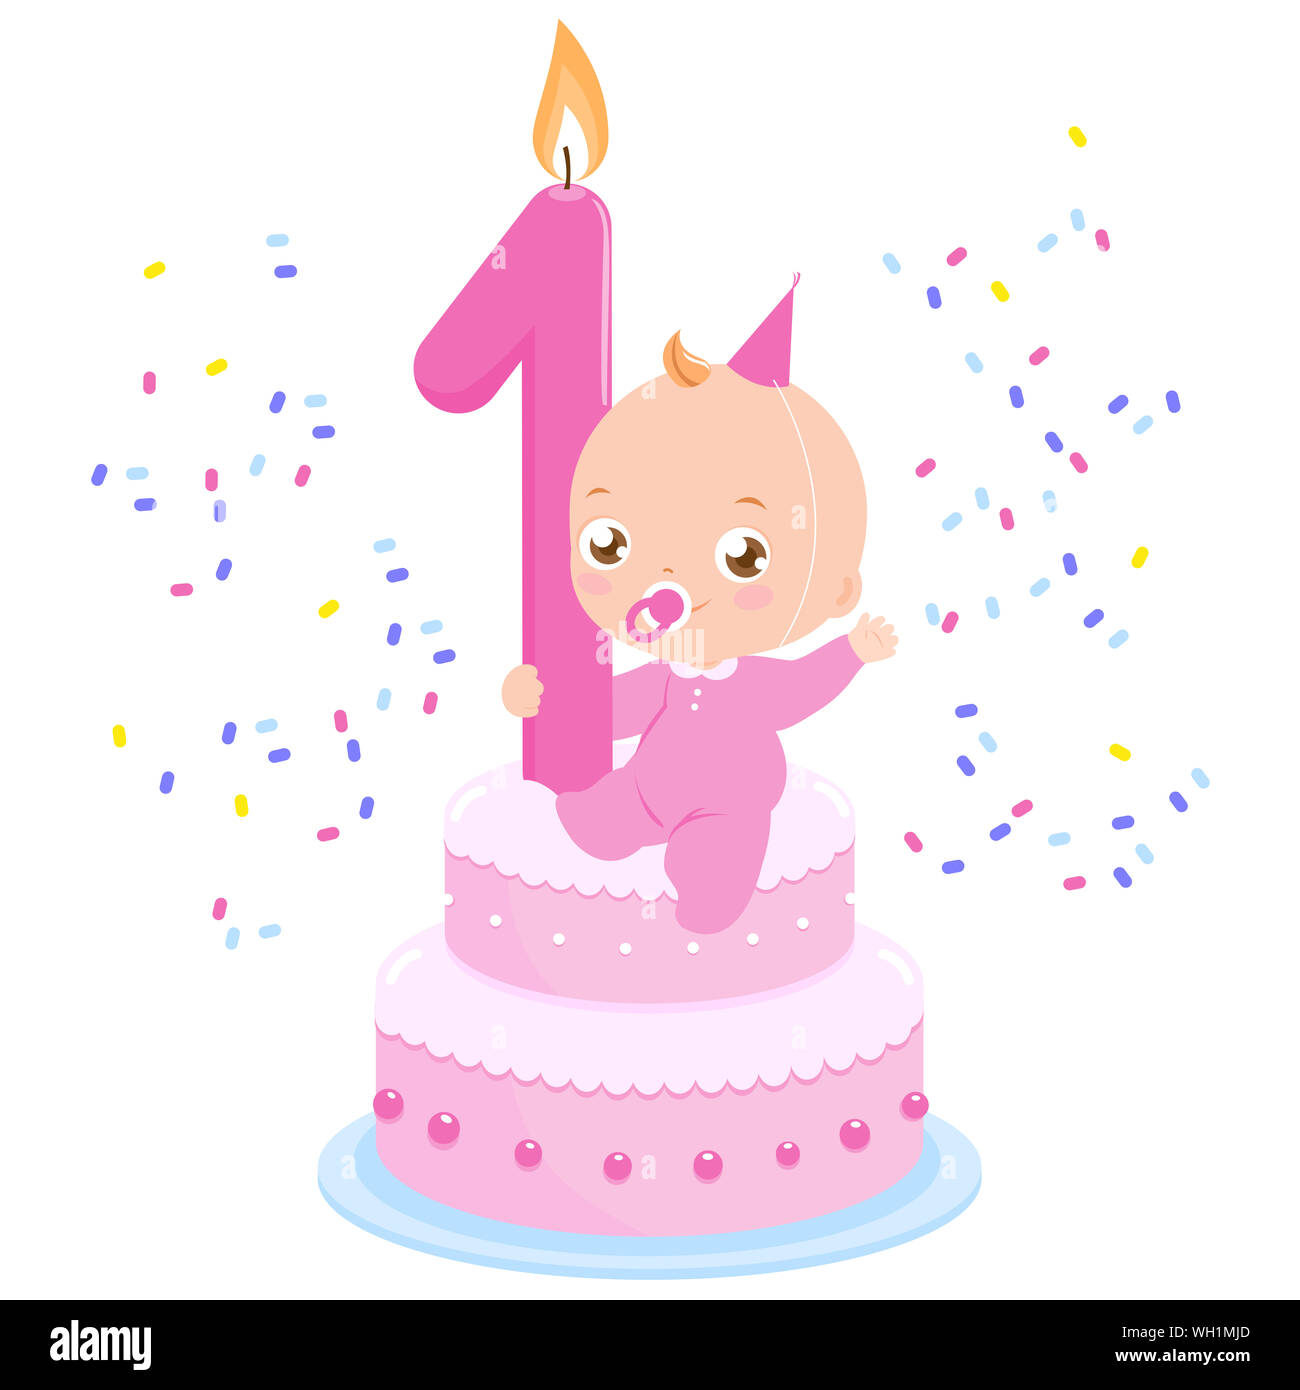 Illustration of a baby girl on a birthday cake celebrating her first  birthday throwing confetti Stock Photo - Alamy